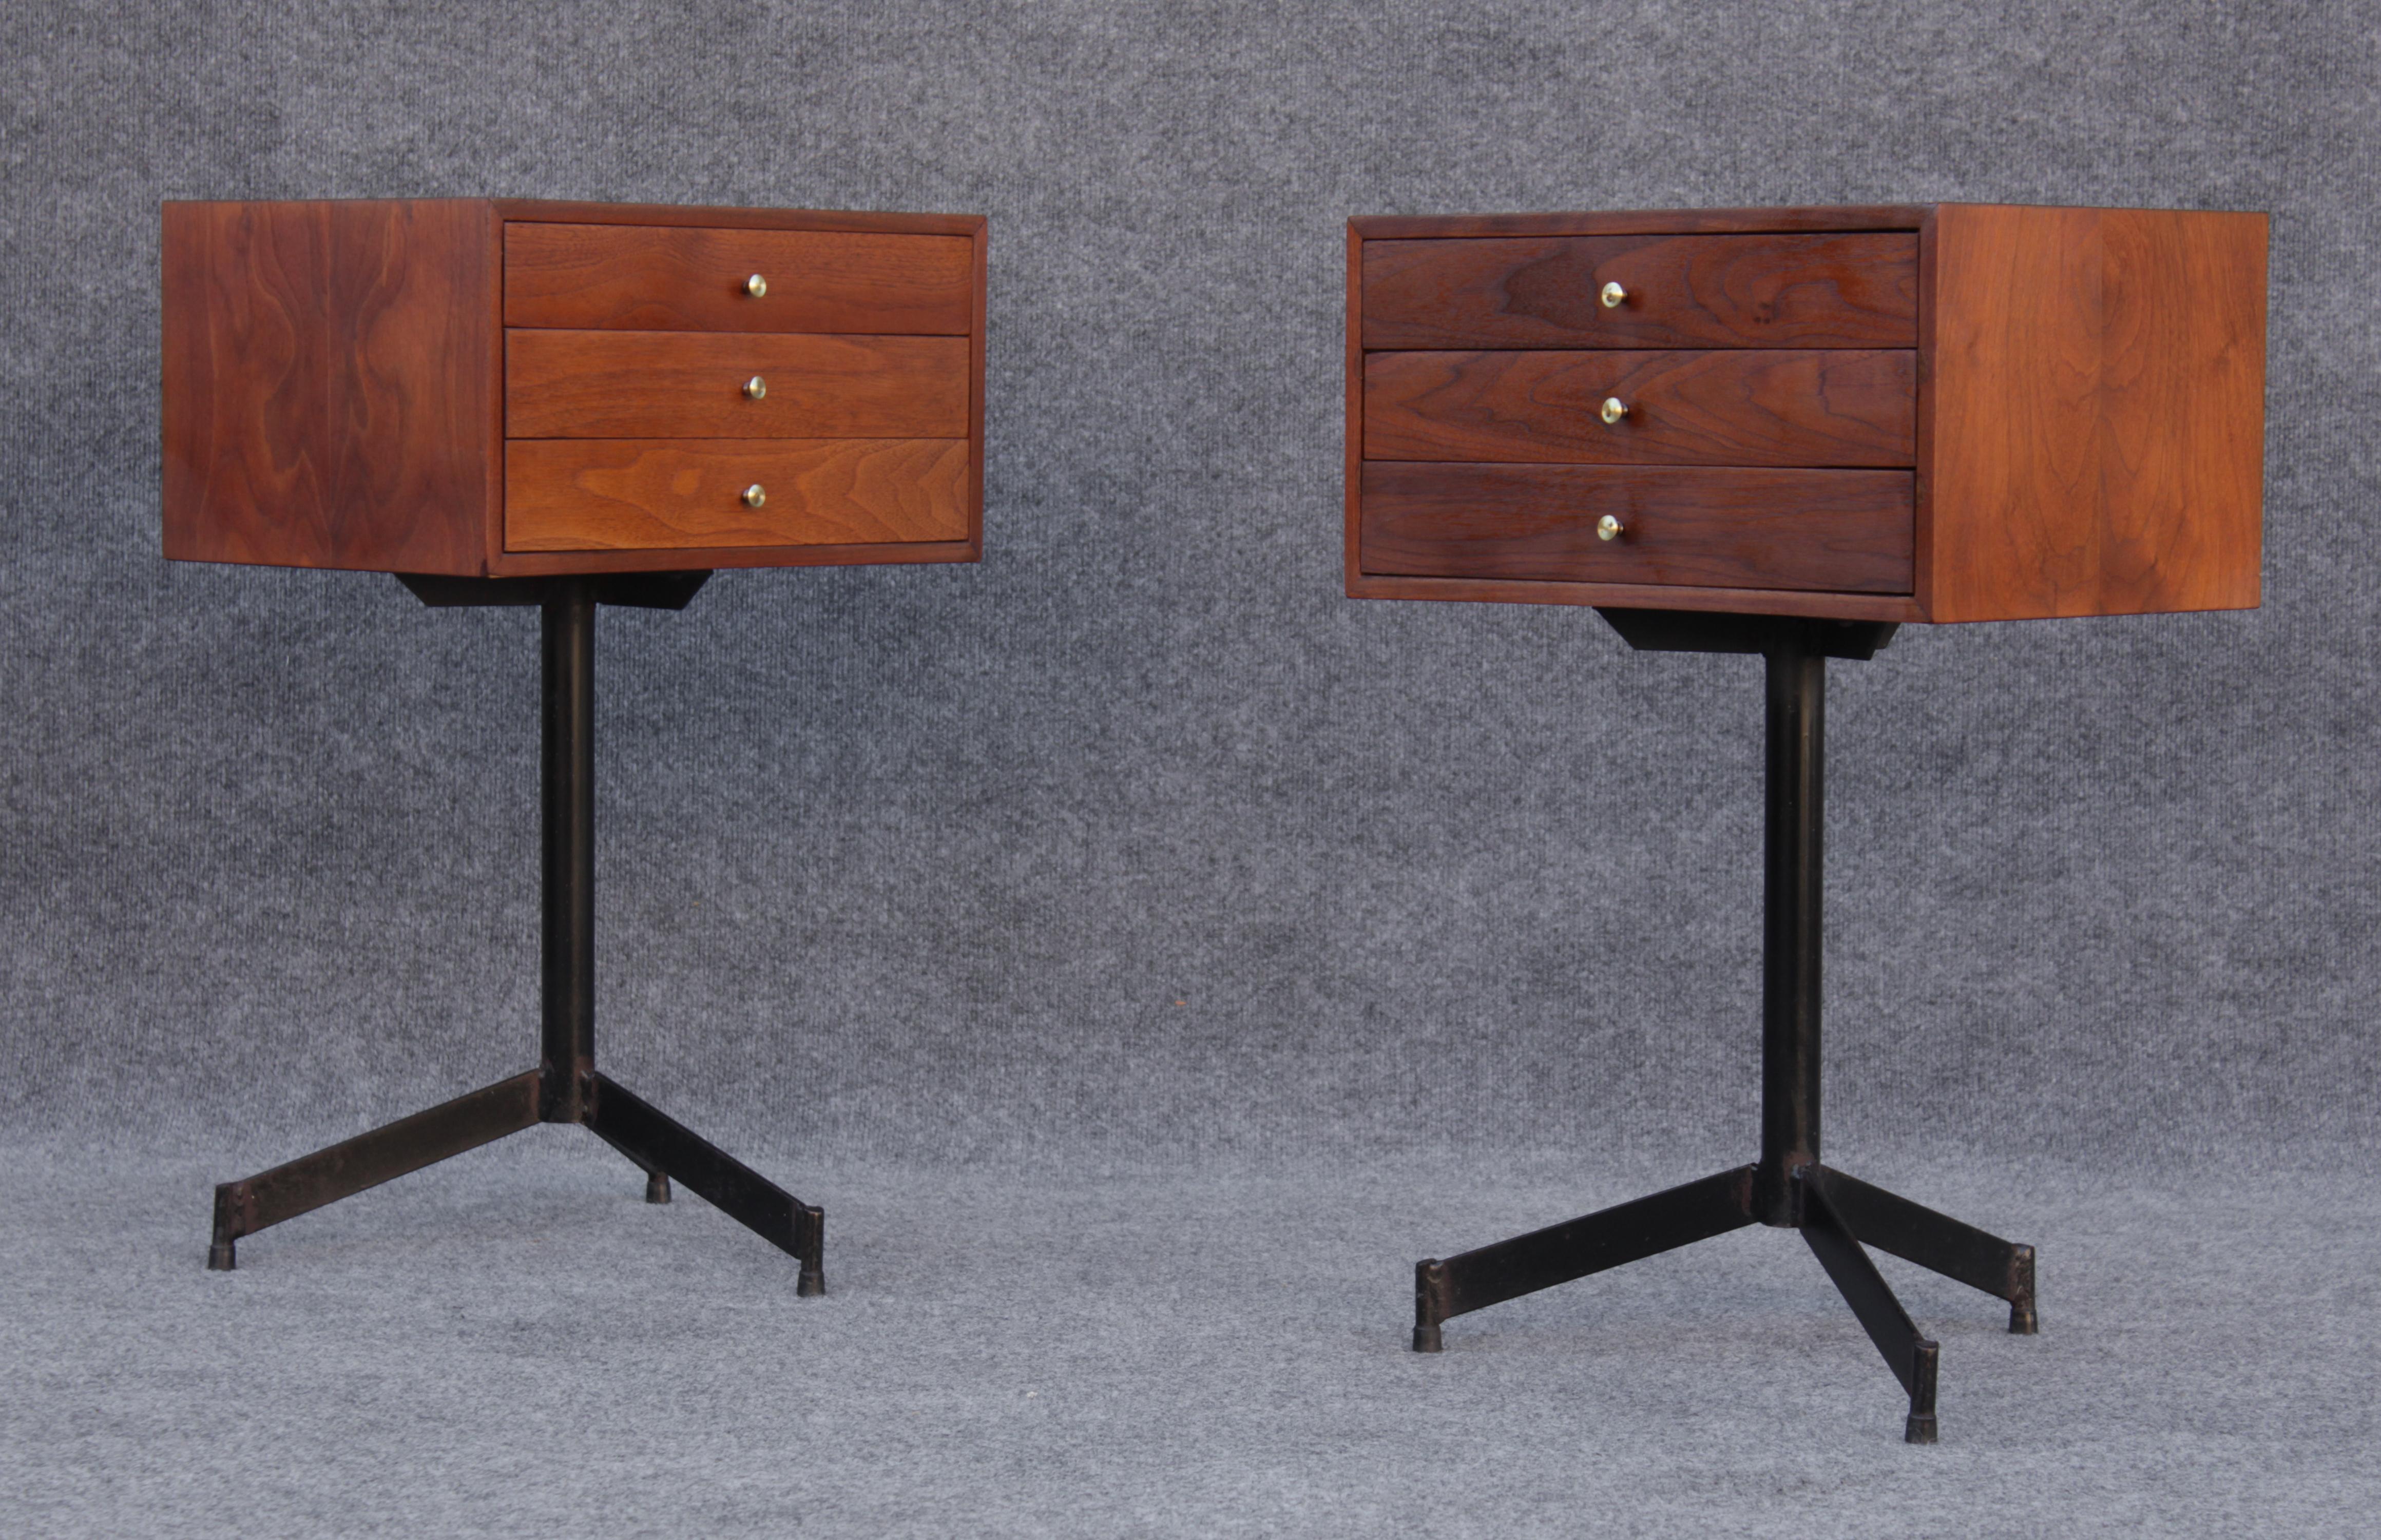 Designed and made in the era of American Mid Century design, these feature a unique look and feel with their handsome 3-drawer walnut body and steel legs. The walnut bodies feature uniform edges around all four corners and brass pulls on each